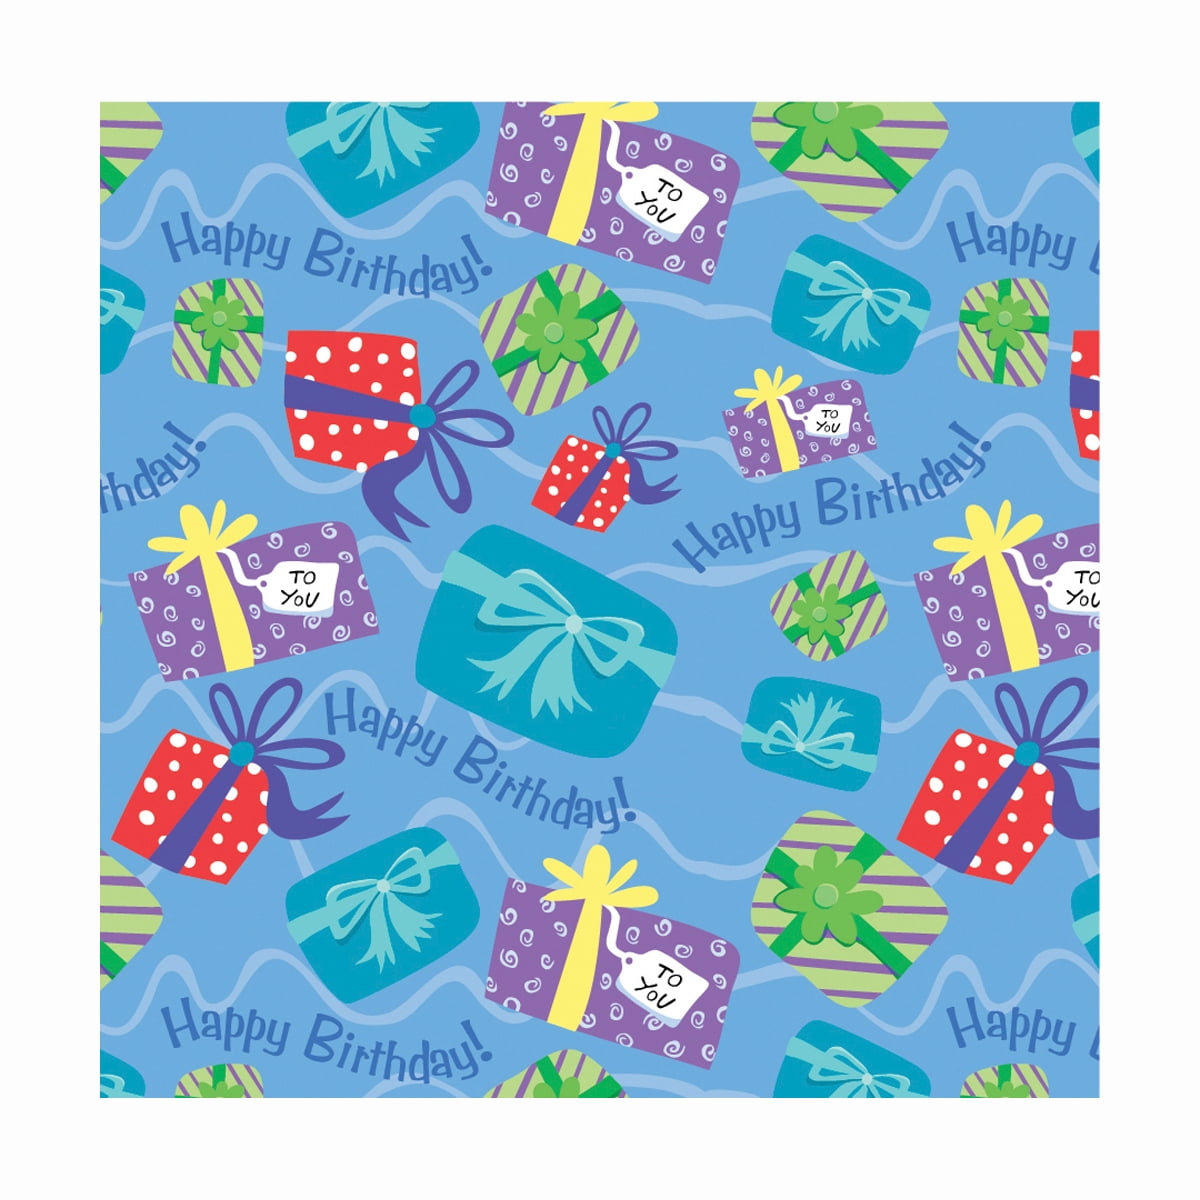 Retro Typographic Vintage Gift Wrapping Paper JUST FOR YOU Hallmark Rainbow Blue 